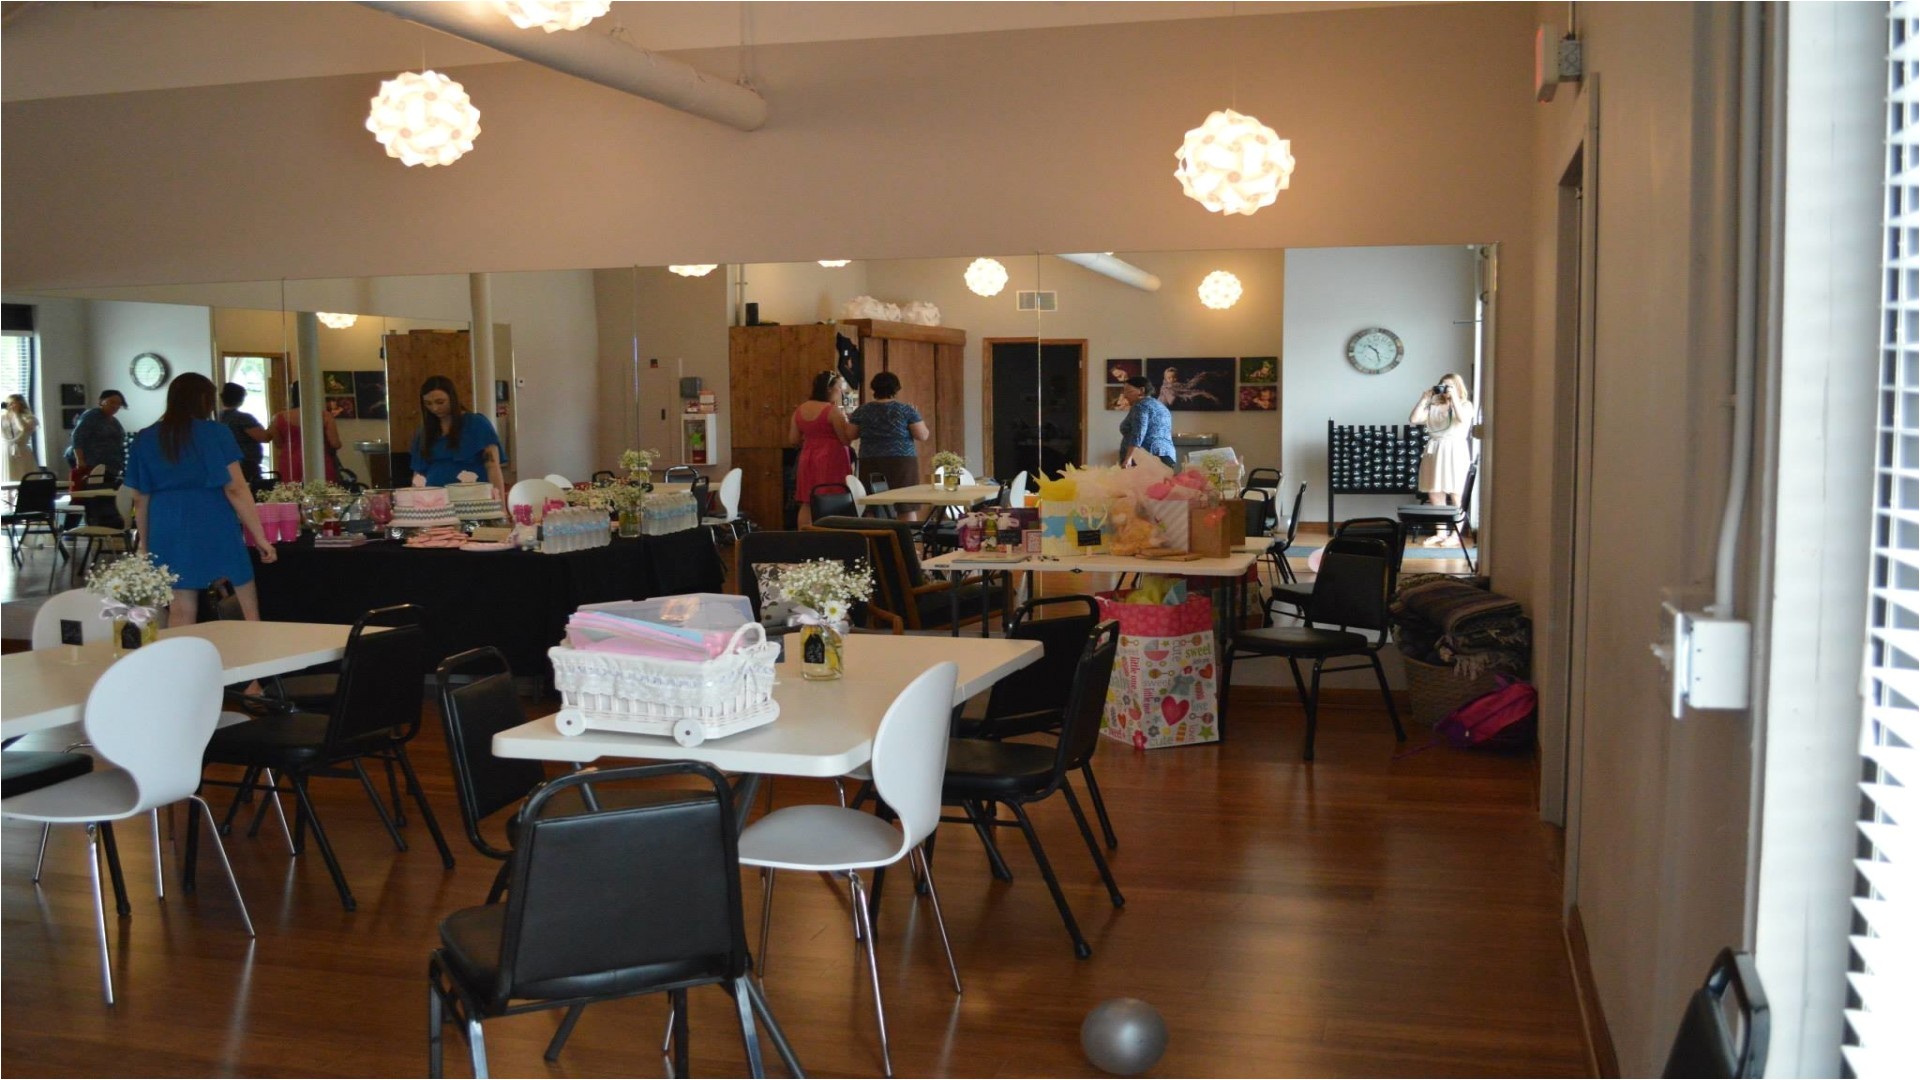 baby shower venues atlanta awesome baby shower venues charlotte nc gallery handicraft ideas home